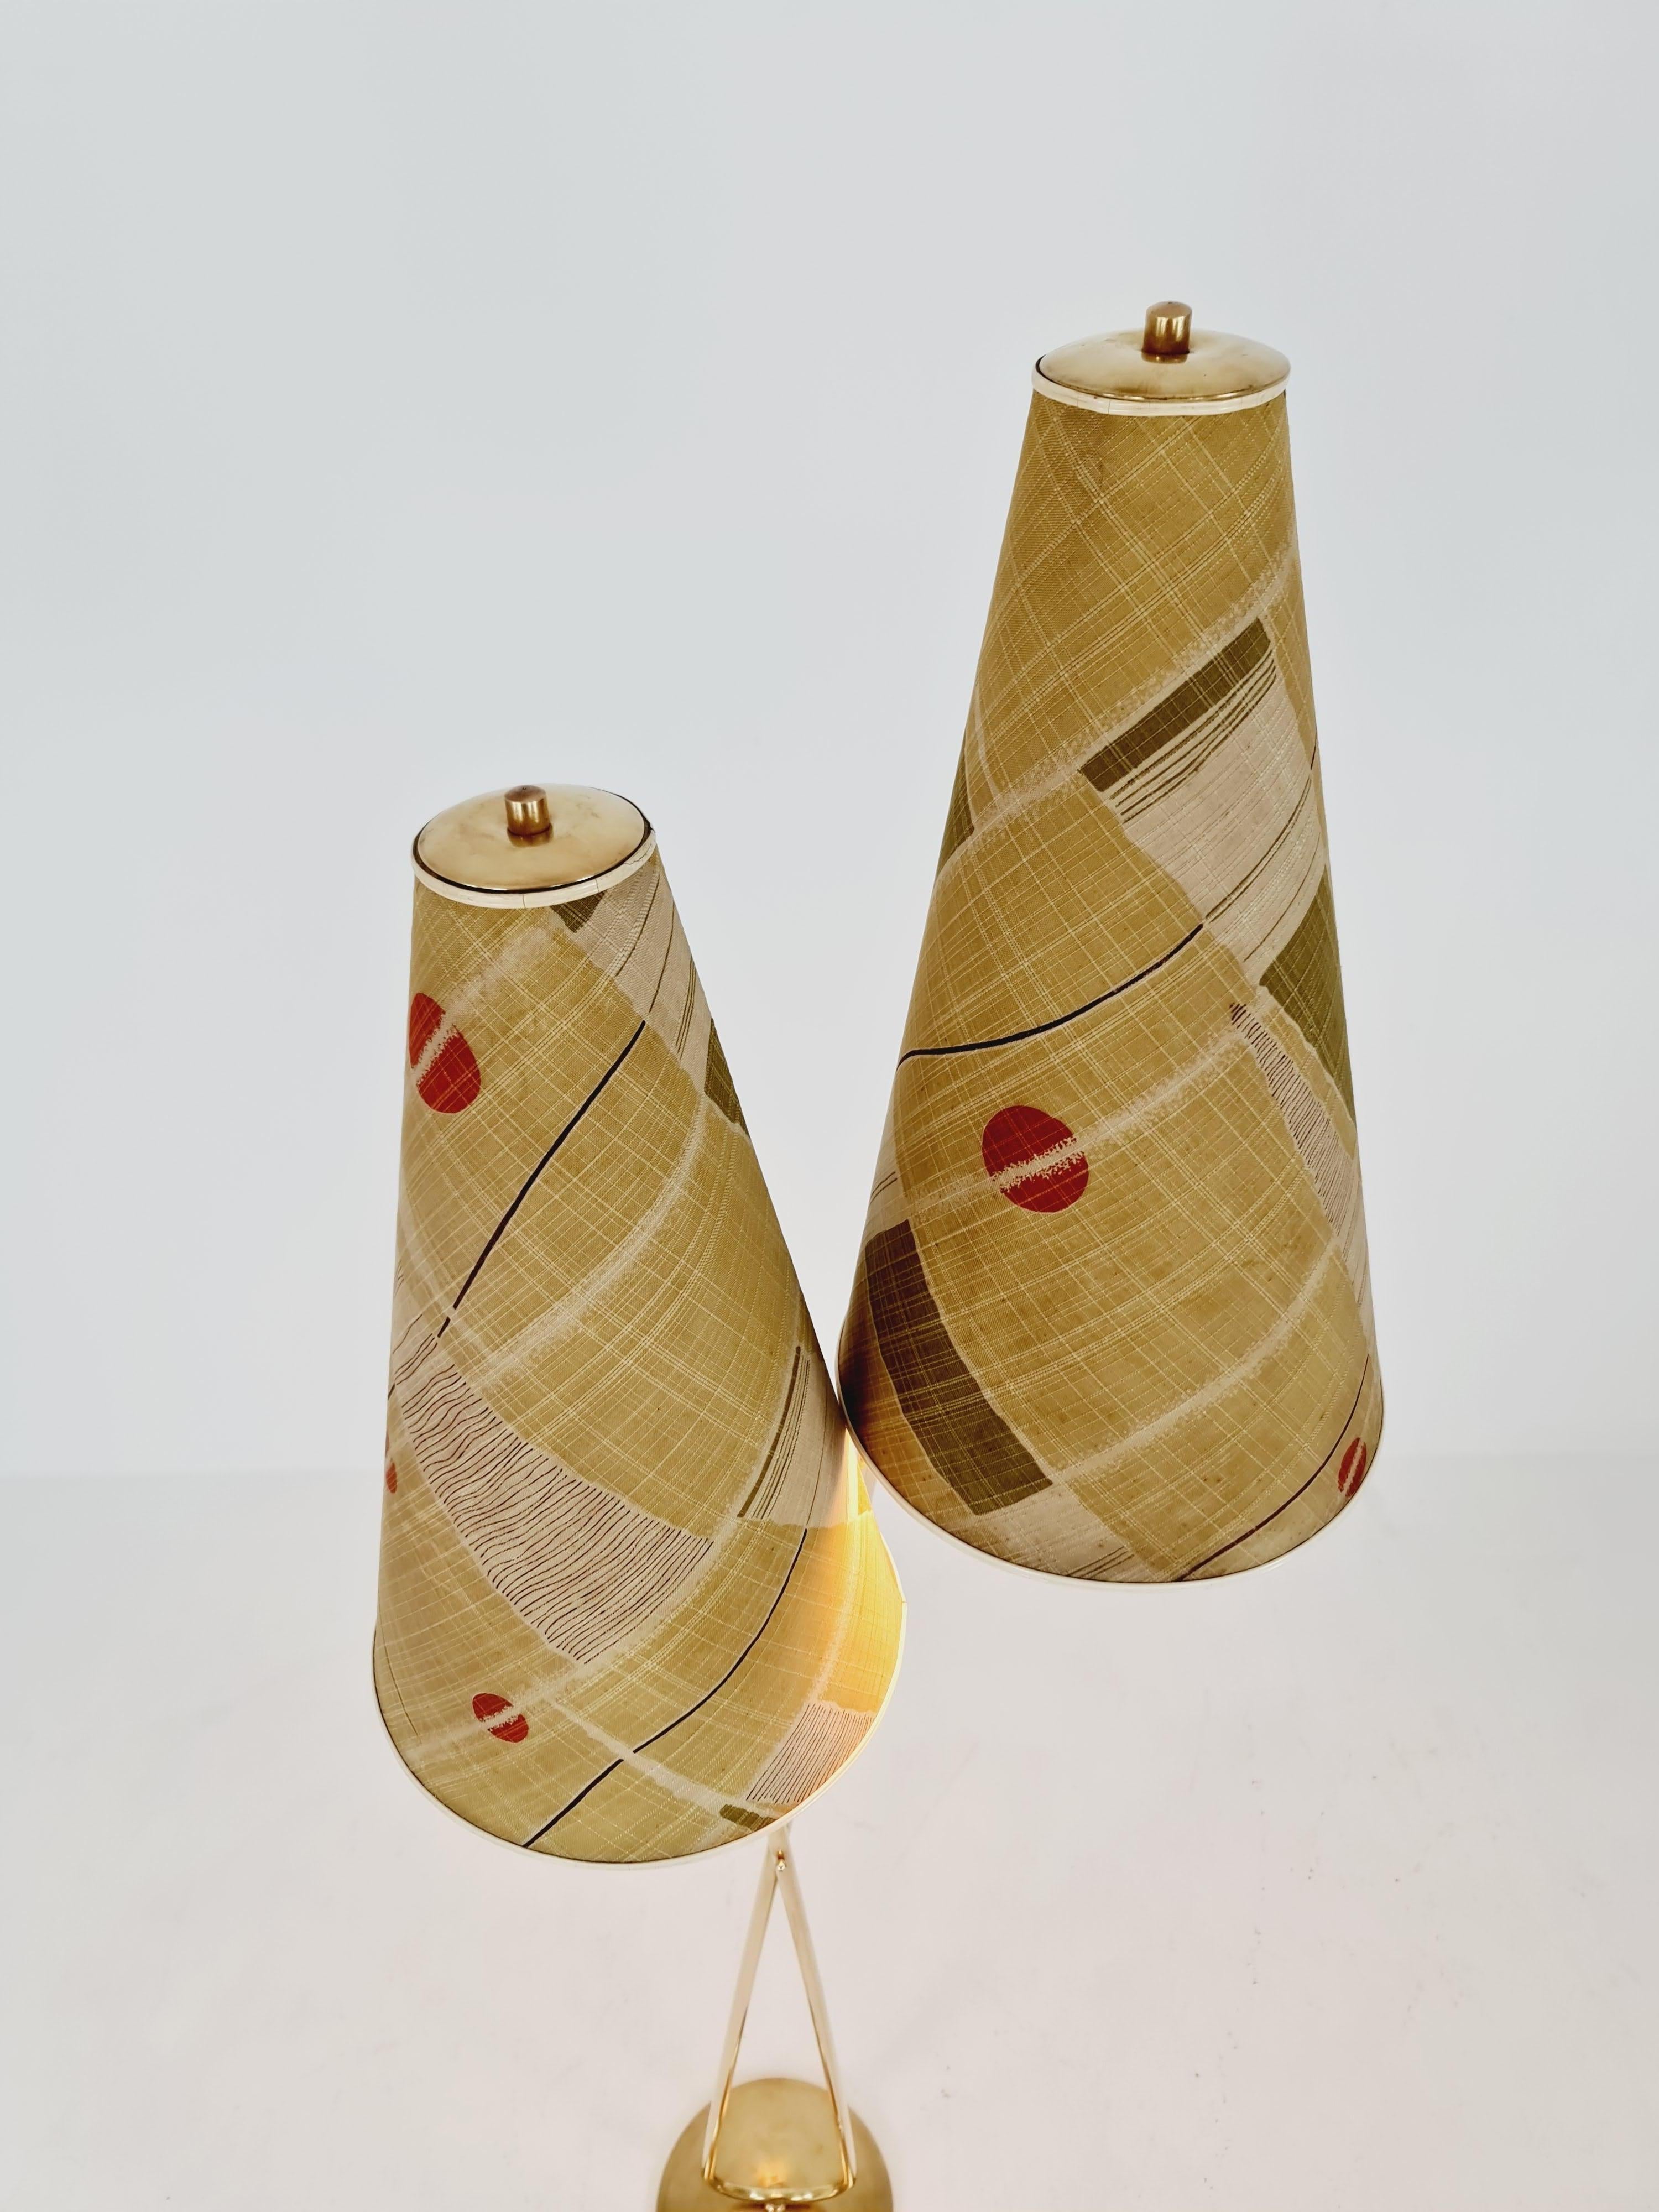 EXTREME RARE brass 1950s vintage floor lamp / bag lamp mcm In Good Condition For Sale In Gaggenau, DE